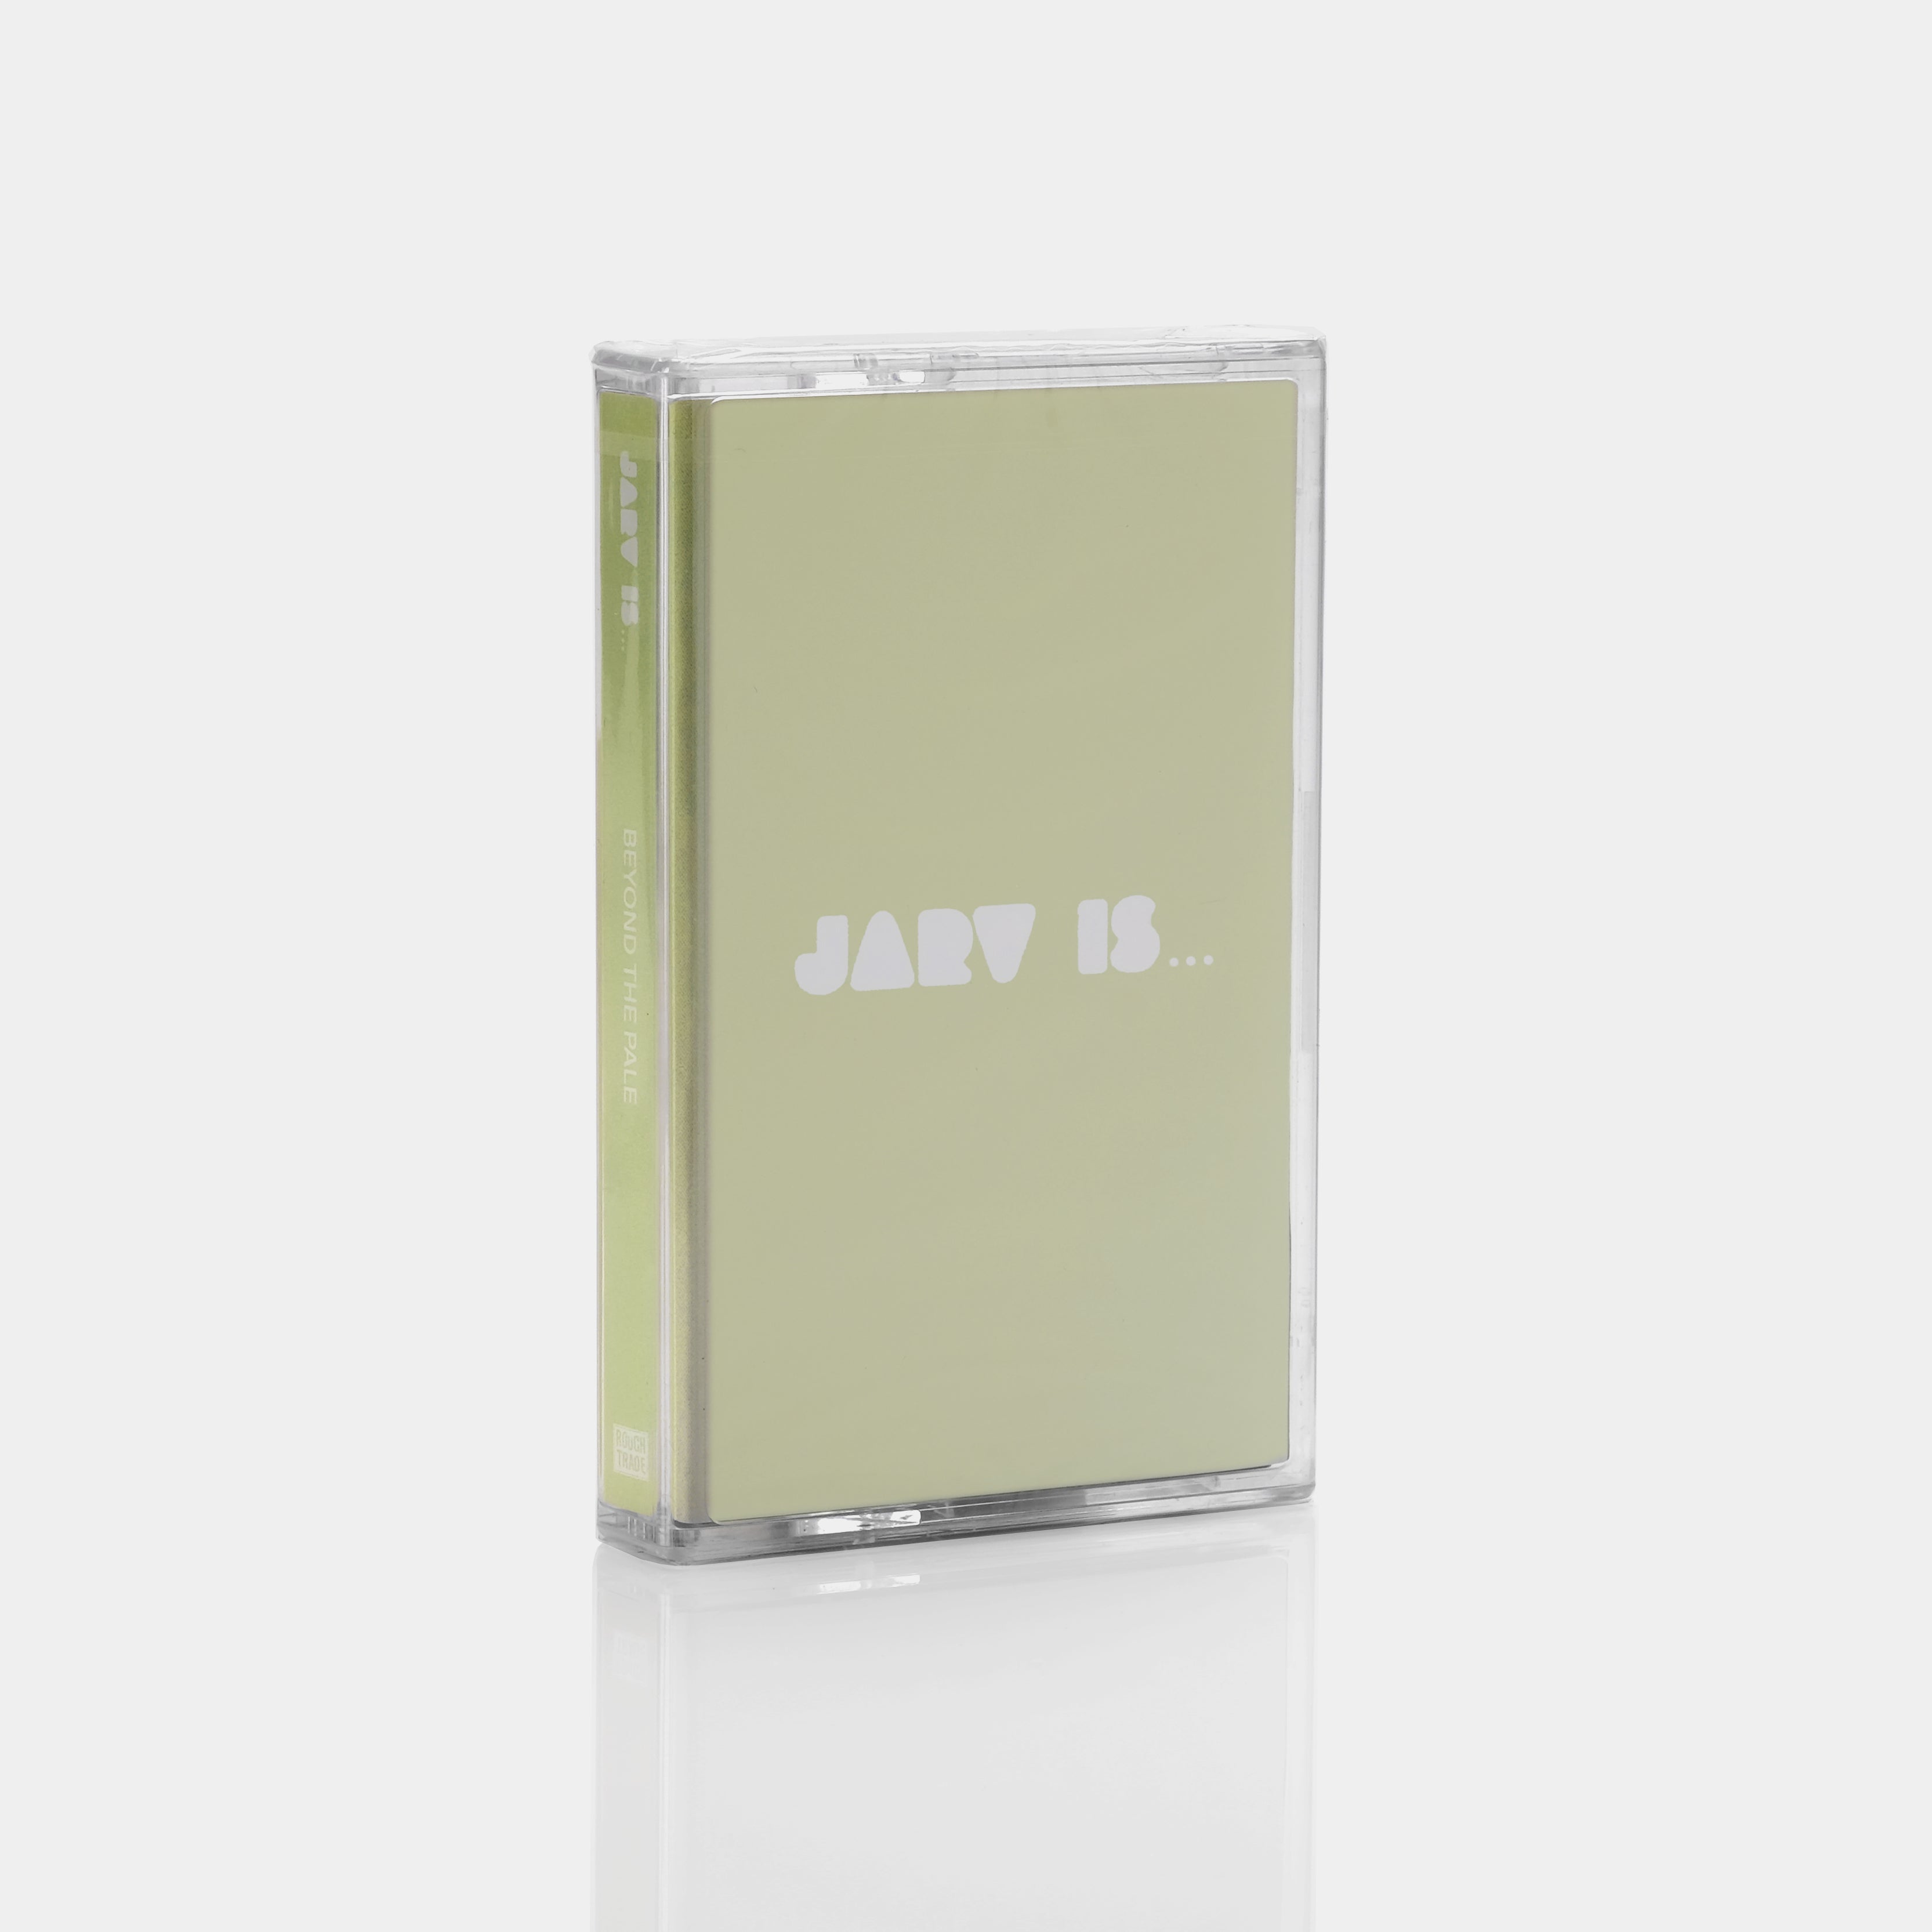 JARV IS... - Beyond The Pale Cassette Tape